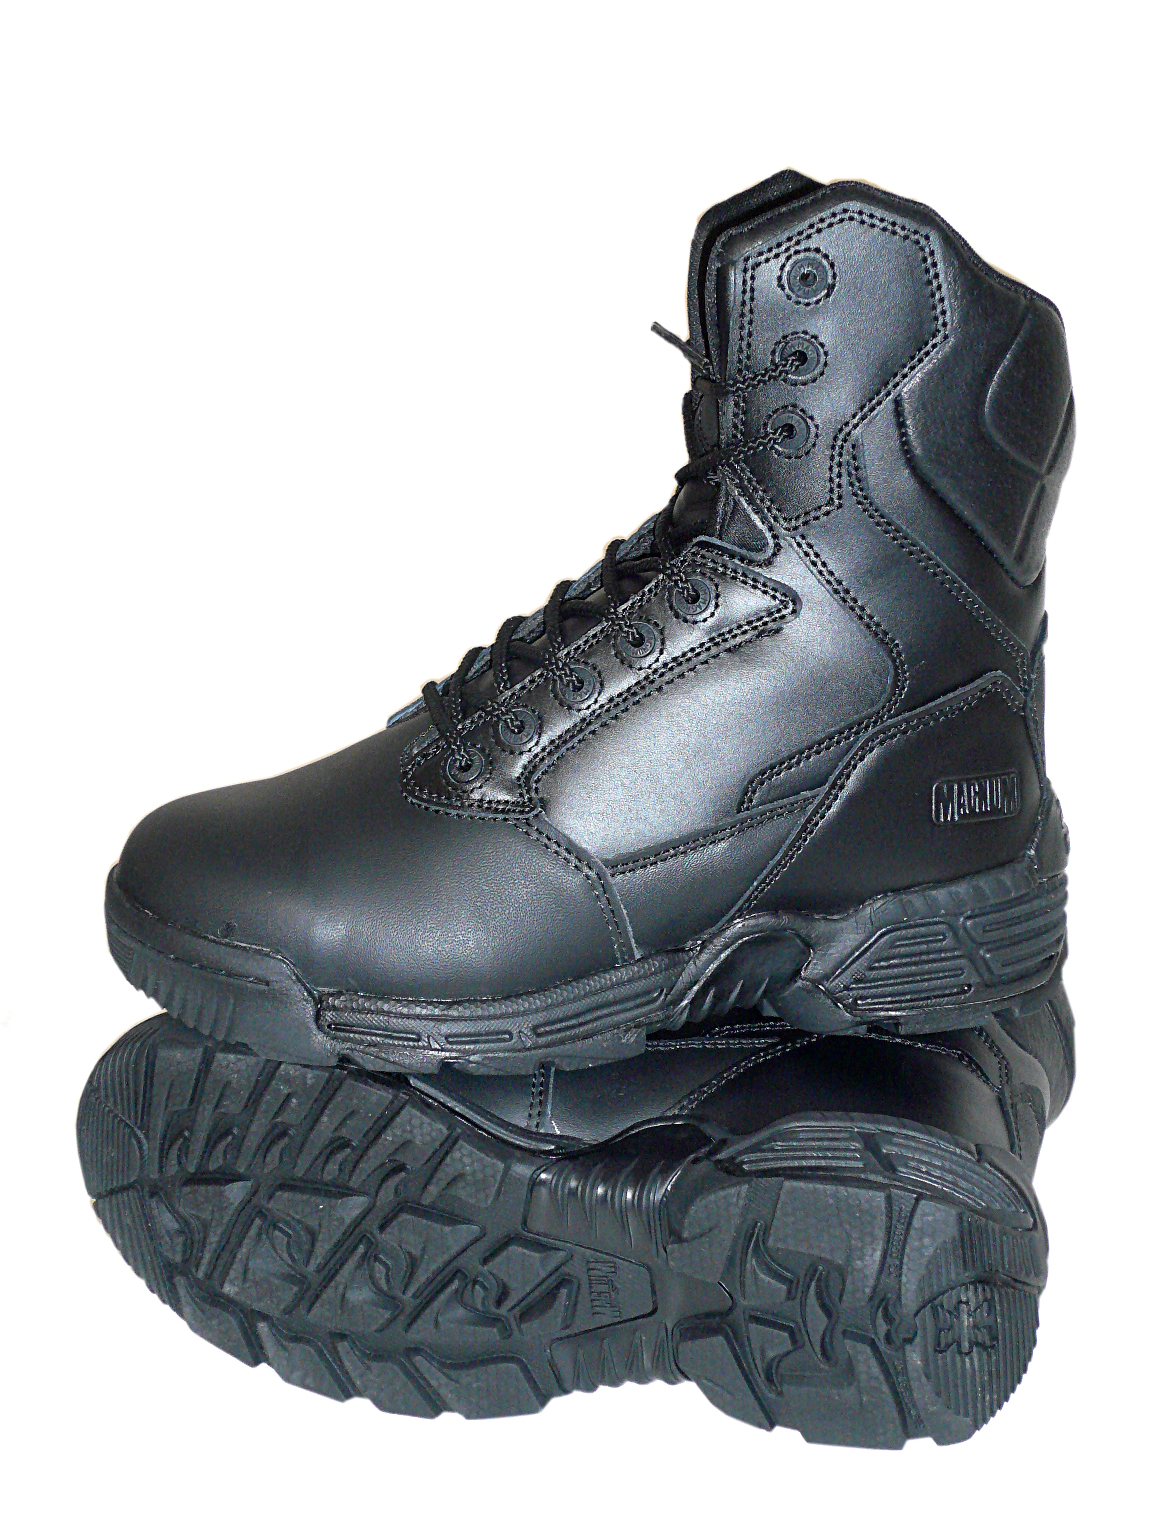 magnum boots police